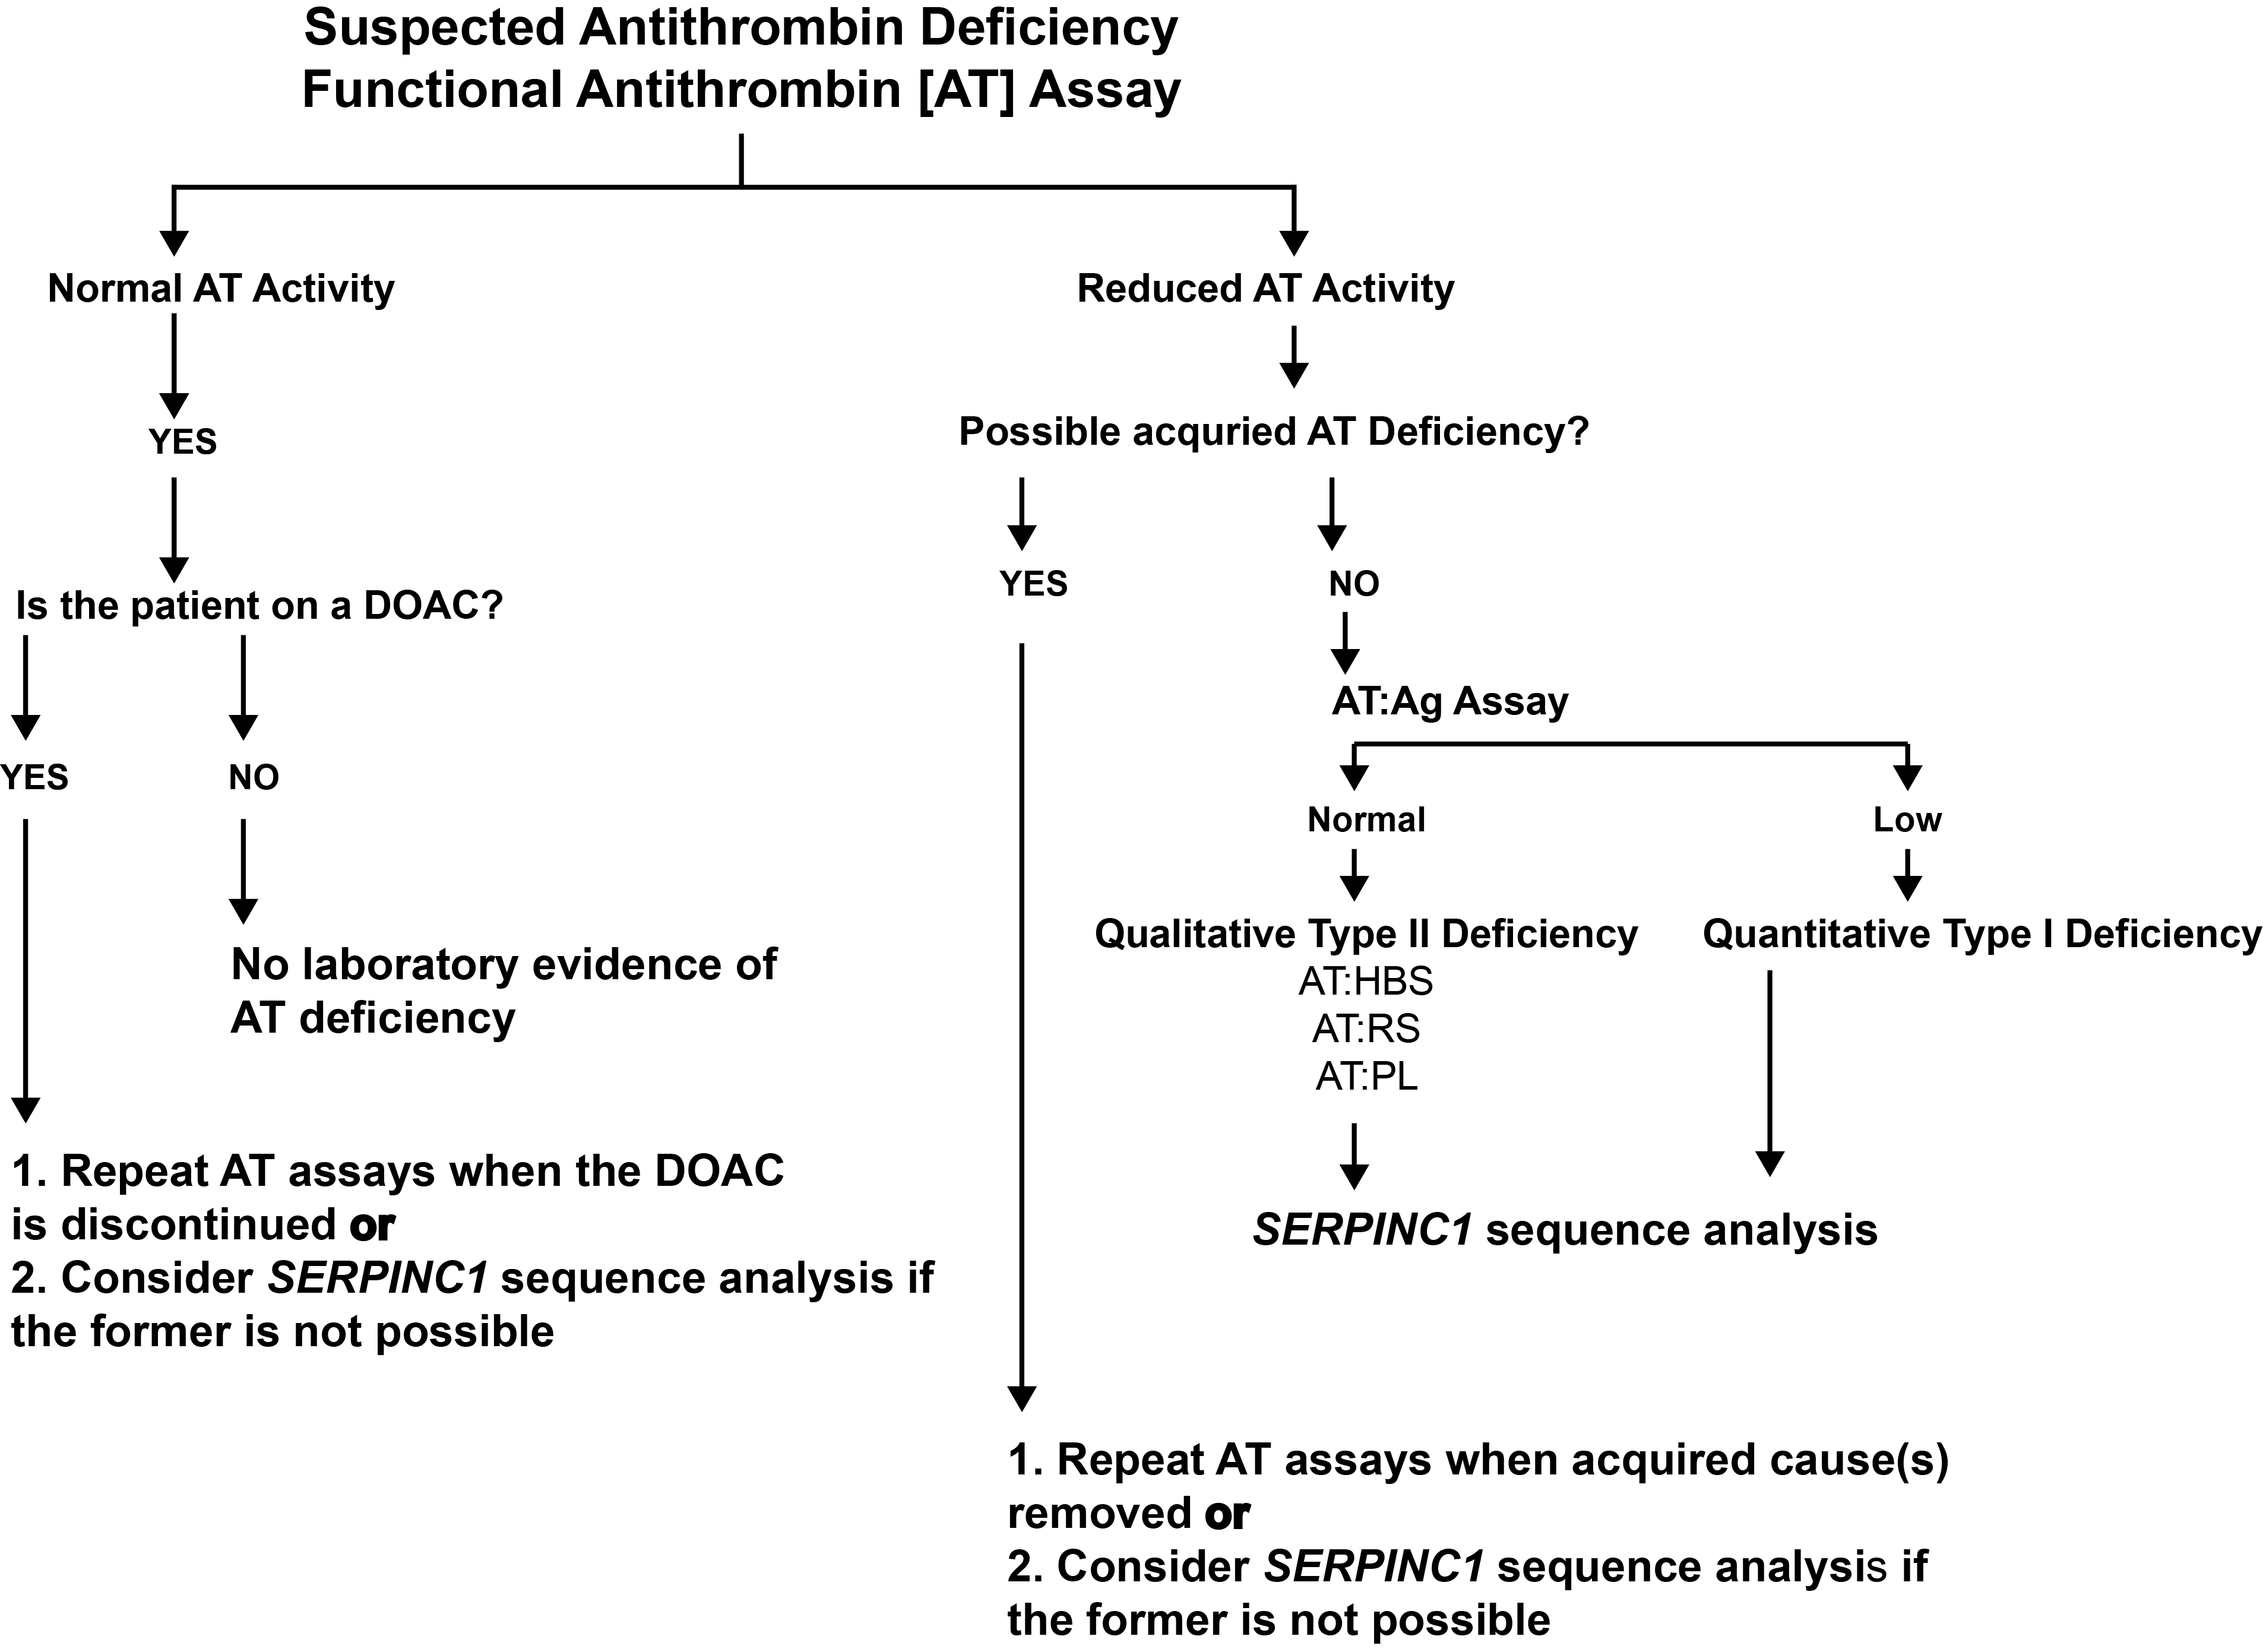 Flowchart for the investigation of suspected Antithrombin deficiency